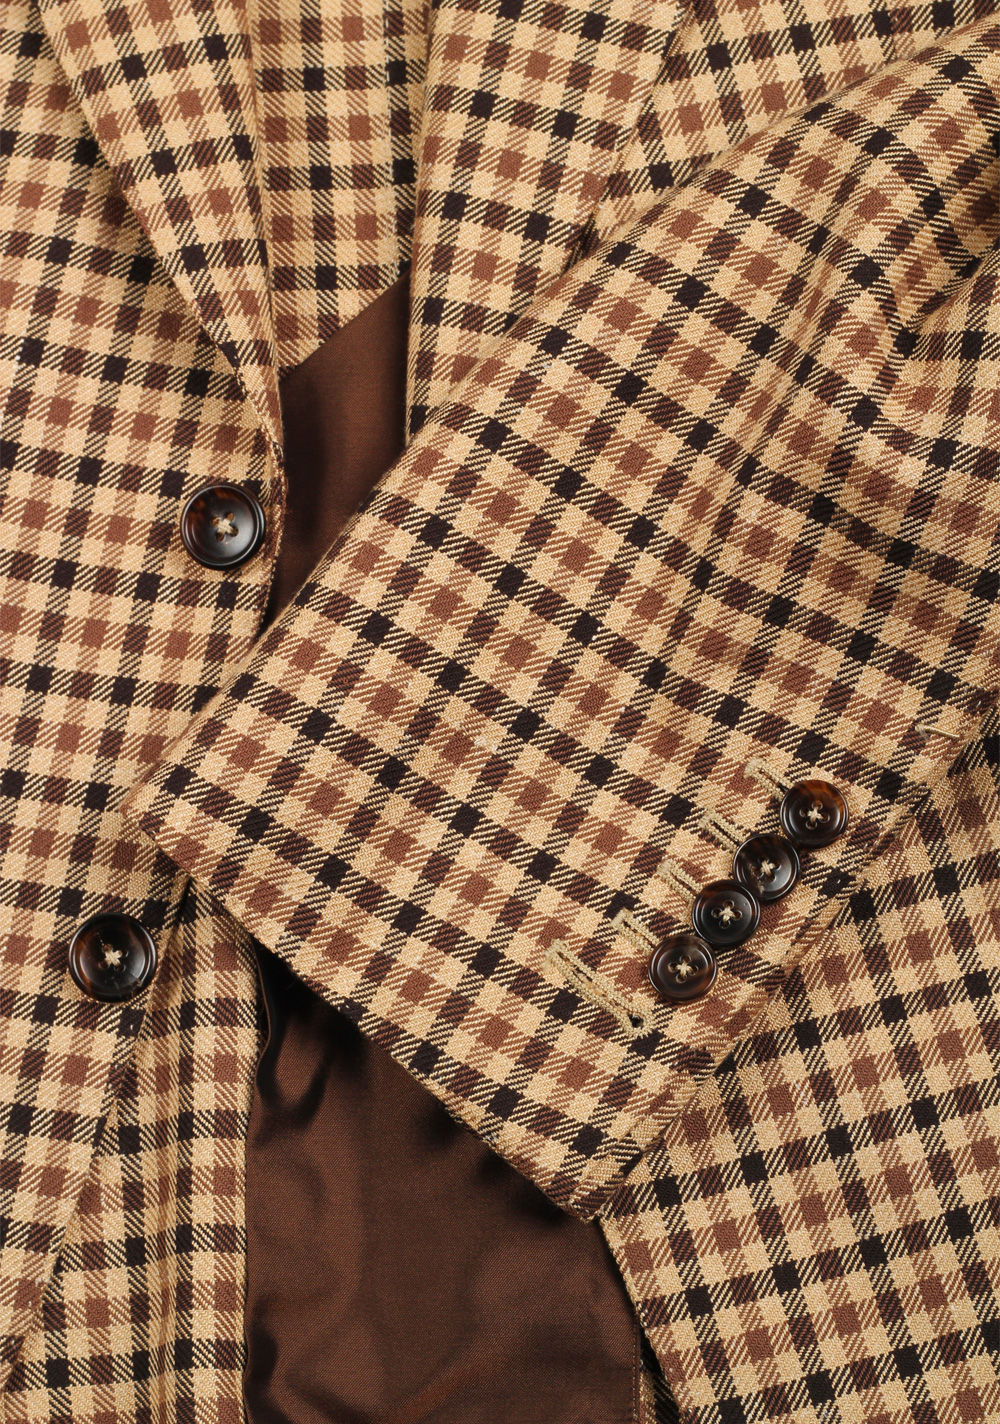 TOM FORD Shelton Checked Brown Sport Coat Size 52 / 42R U.S. | Costume Limité